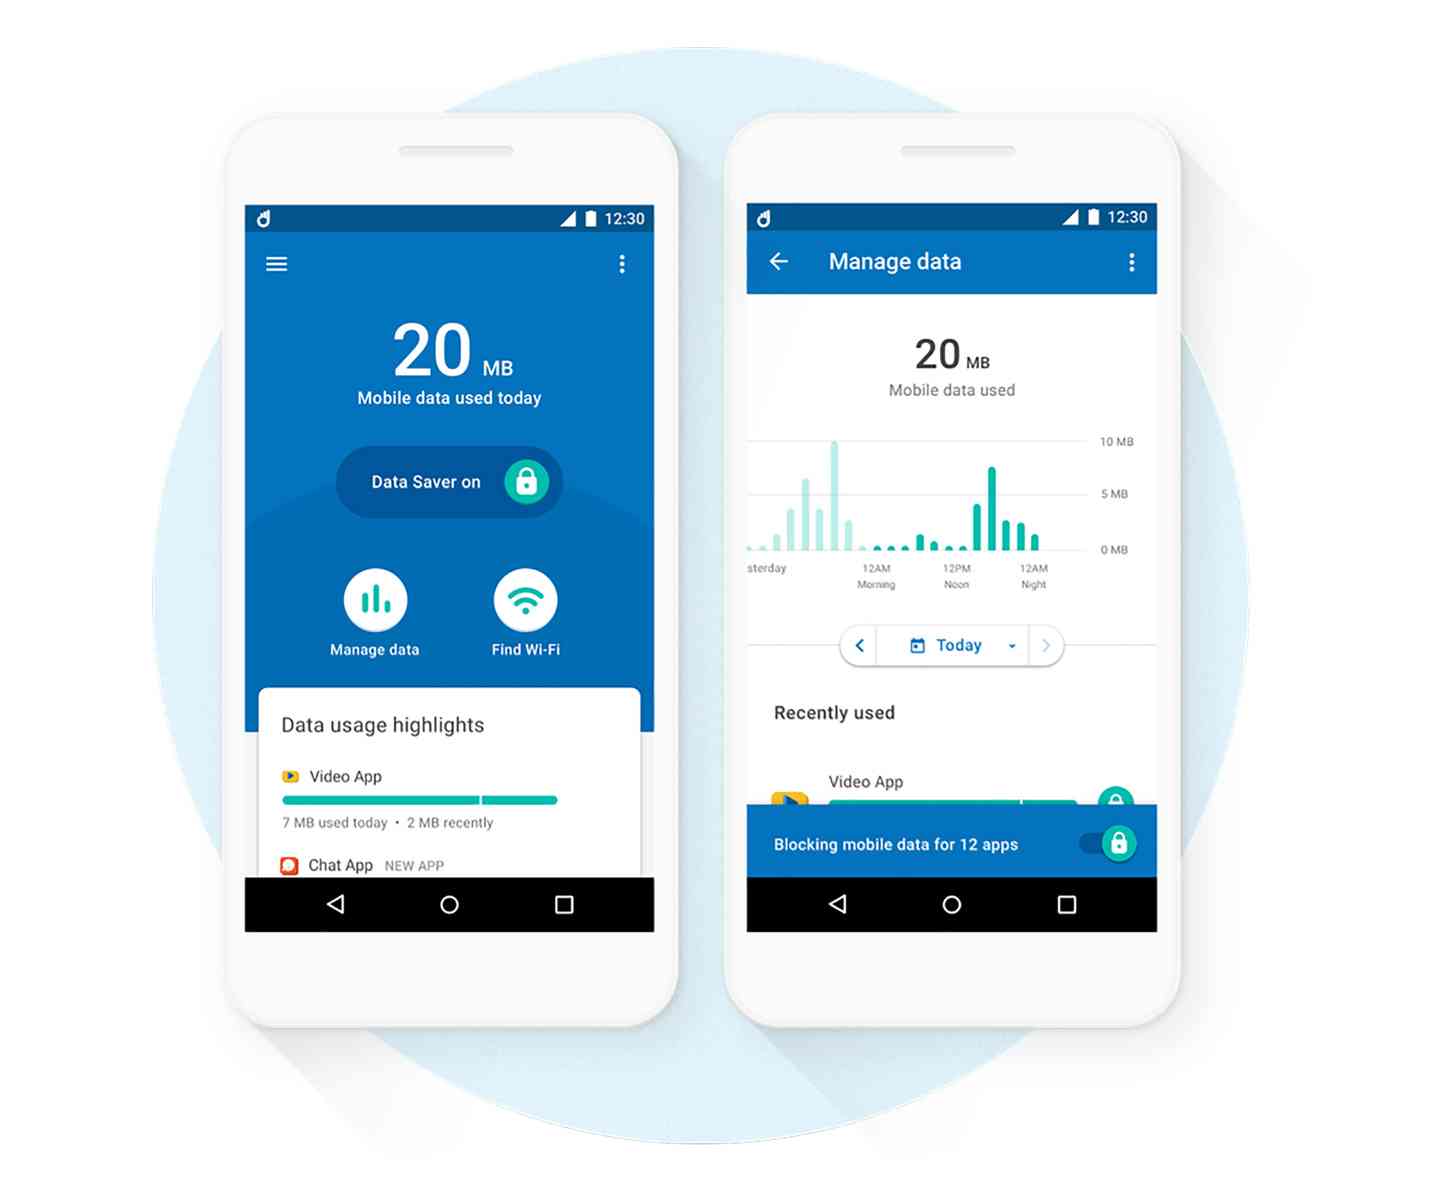 Google Datally Android app official